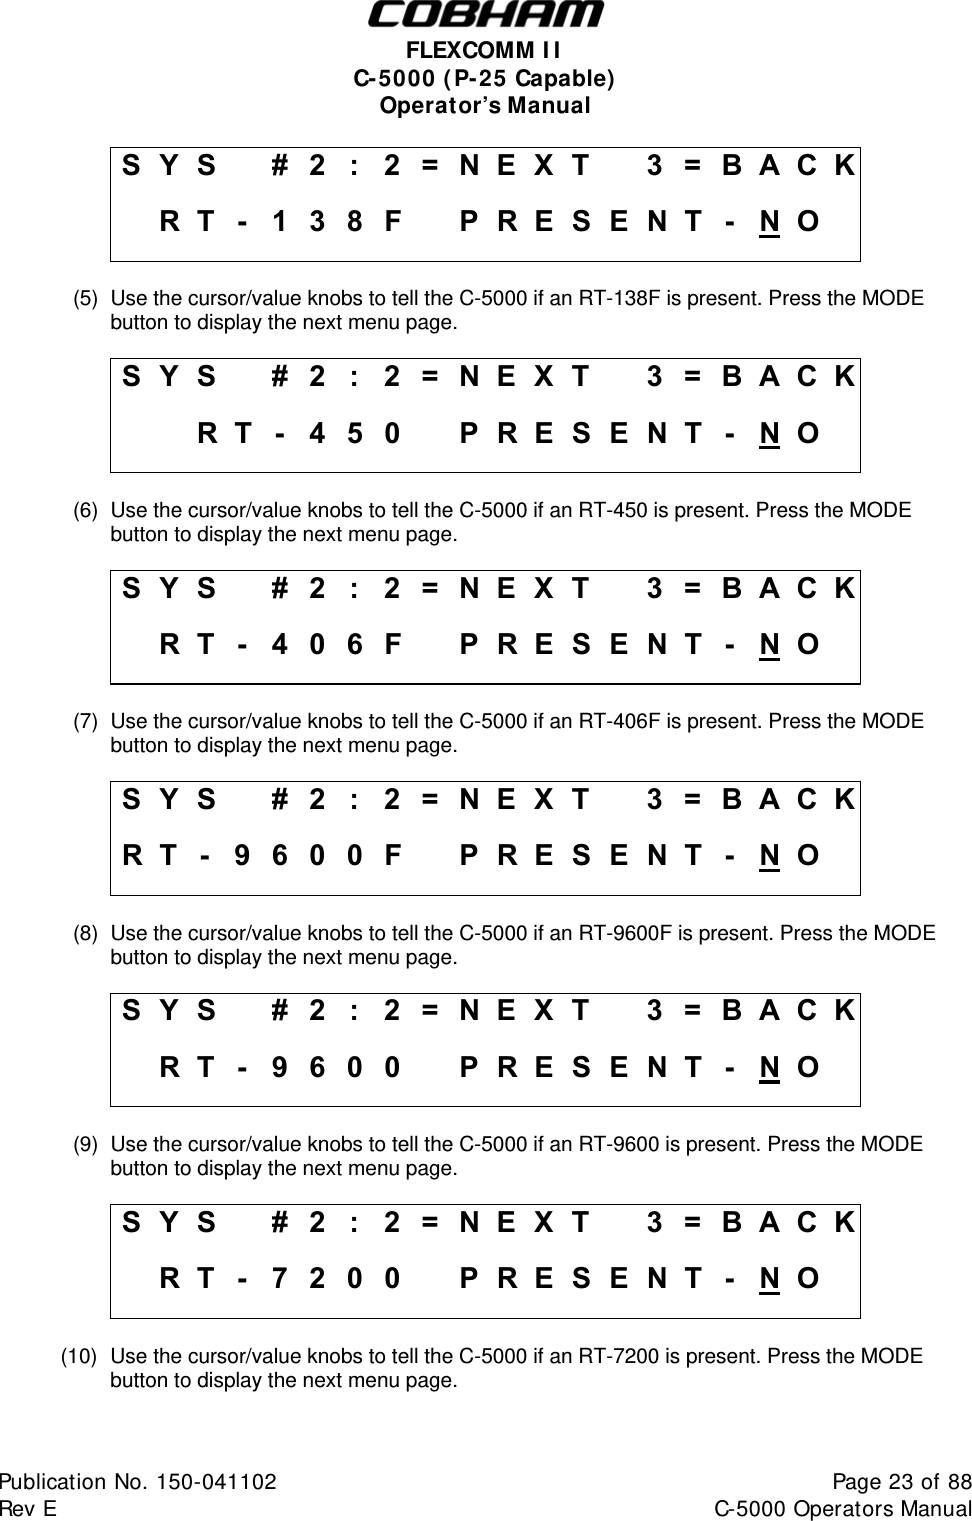  FLEXCOMM II C-5000 (P-25 Capable) Operator’s Manual S Y S    #  2  :  2 = N E X T   3 = B A C K   R T -  1 3 8F   PRESENT - N O   (5)  Use the cursor/value knobs to tell the C-5000 if an RT-138F is present. Press the MODE button to display the next menu page.  S Y S    #  2  :  2 = N E X T   3 = B A C K    R T - 4 5 0  PRESENT - N O   (6)  Use the cursor/value knobs to tell the C-5000 if an RT-450 is present. Press the MODE button to display the next menu page.  S Y S    #  2  :  2 = N E X T   3 = B A C K   R T -  4 0 6F   PRESENT - N O   (7)  Use the cursor/value knobs to tell the C-5000 if an RT-406F is present. Press the MODE button to display the next menu page.  S Y S    #  2  :  2 = N E X T   3 = B A C K R T -  9 6 0 0 F   PRESENT - N O   (8)  Use the cursor/value knobs to tell the C-5000 if an RT-9600F is present. Press the MODE button to display the next menu page.  S Y S    #  2  :  2 = N E X T   3 = B A C K   R T -  9 6 00   PRESENT - N O   (9)  Use the cursor/value knobs to tell the C-5000 if an RT-9600 is present. Press the MODE button to display the next menu page.  S Y S    #  2  :  2 = N E X T   3 = B A C K   R T -  7 2 00   PRESENT - N O   (10)  Use the cursor/value knobs to tell the C-5000 if an RT-7200 is present. Press the MODE button to display the next menu page.  Publication No. 150-041102  Page 23 of 88  Rev E  C-5000 Operators Manual    